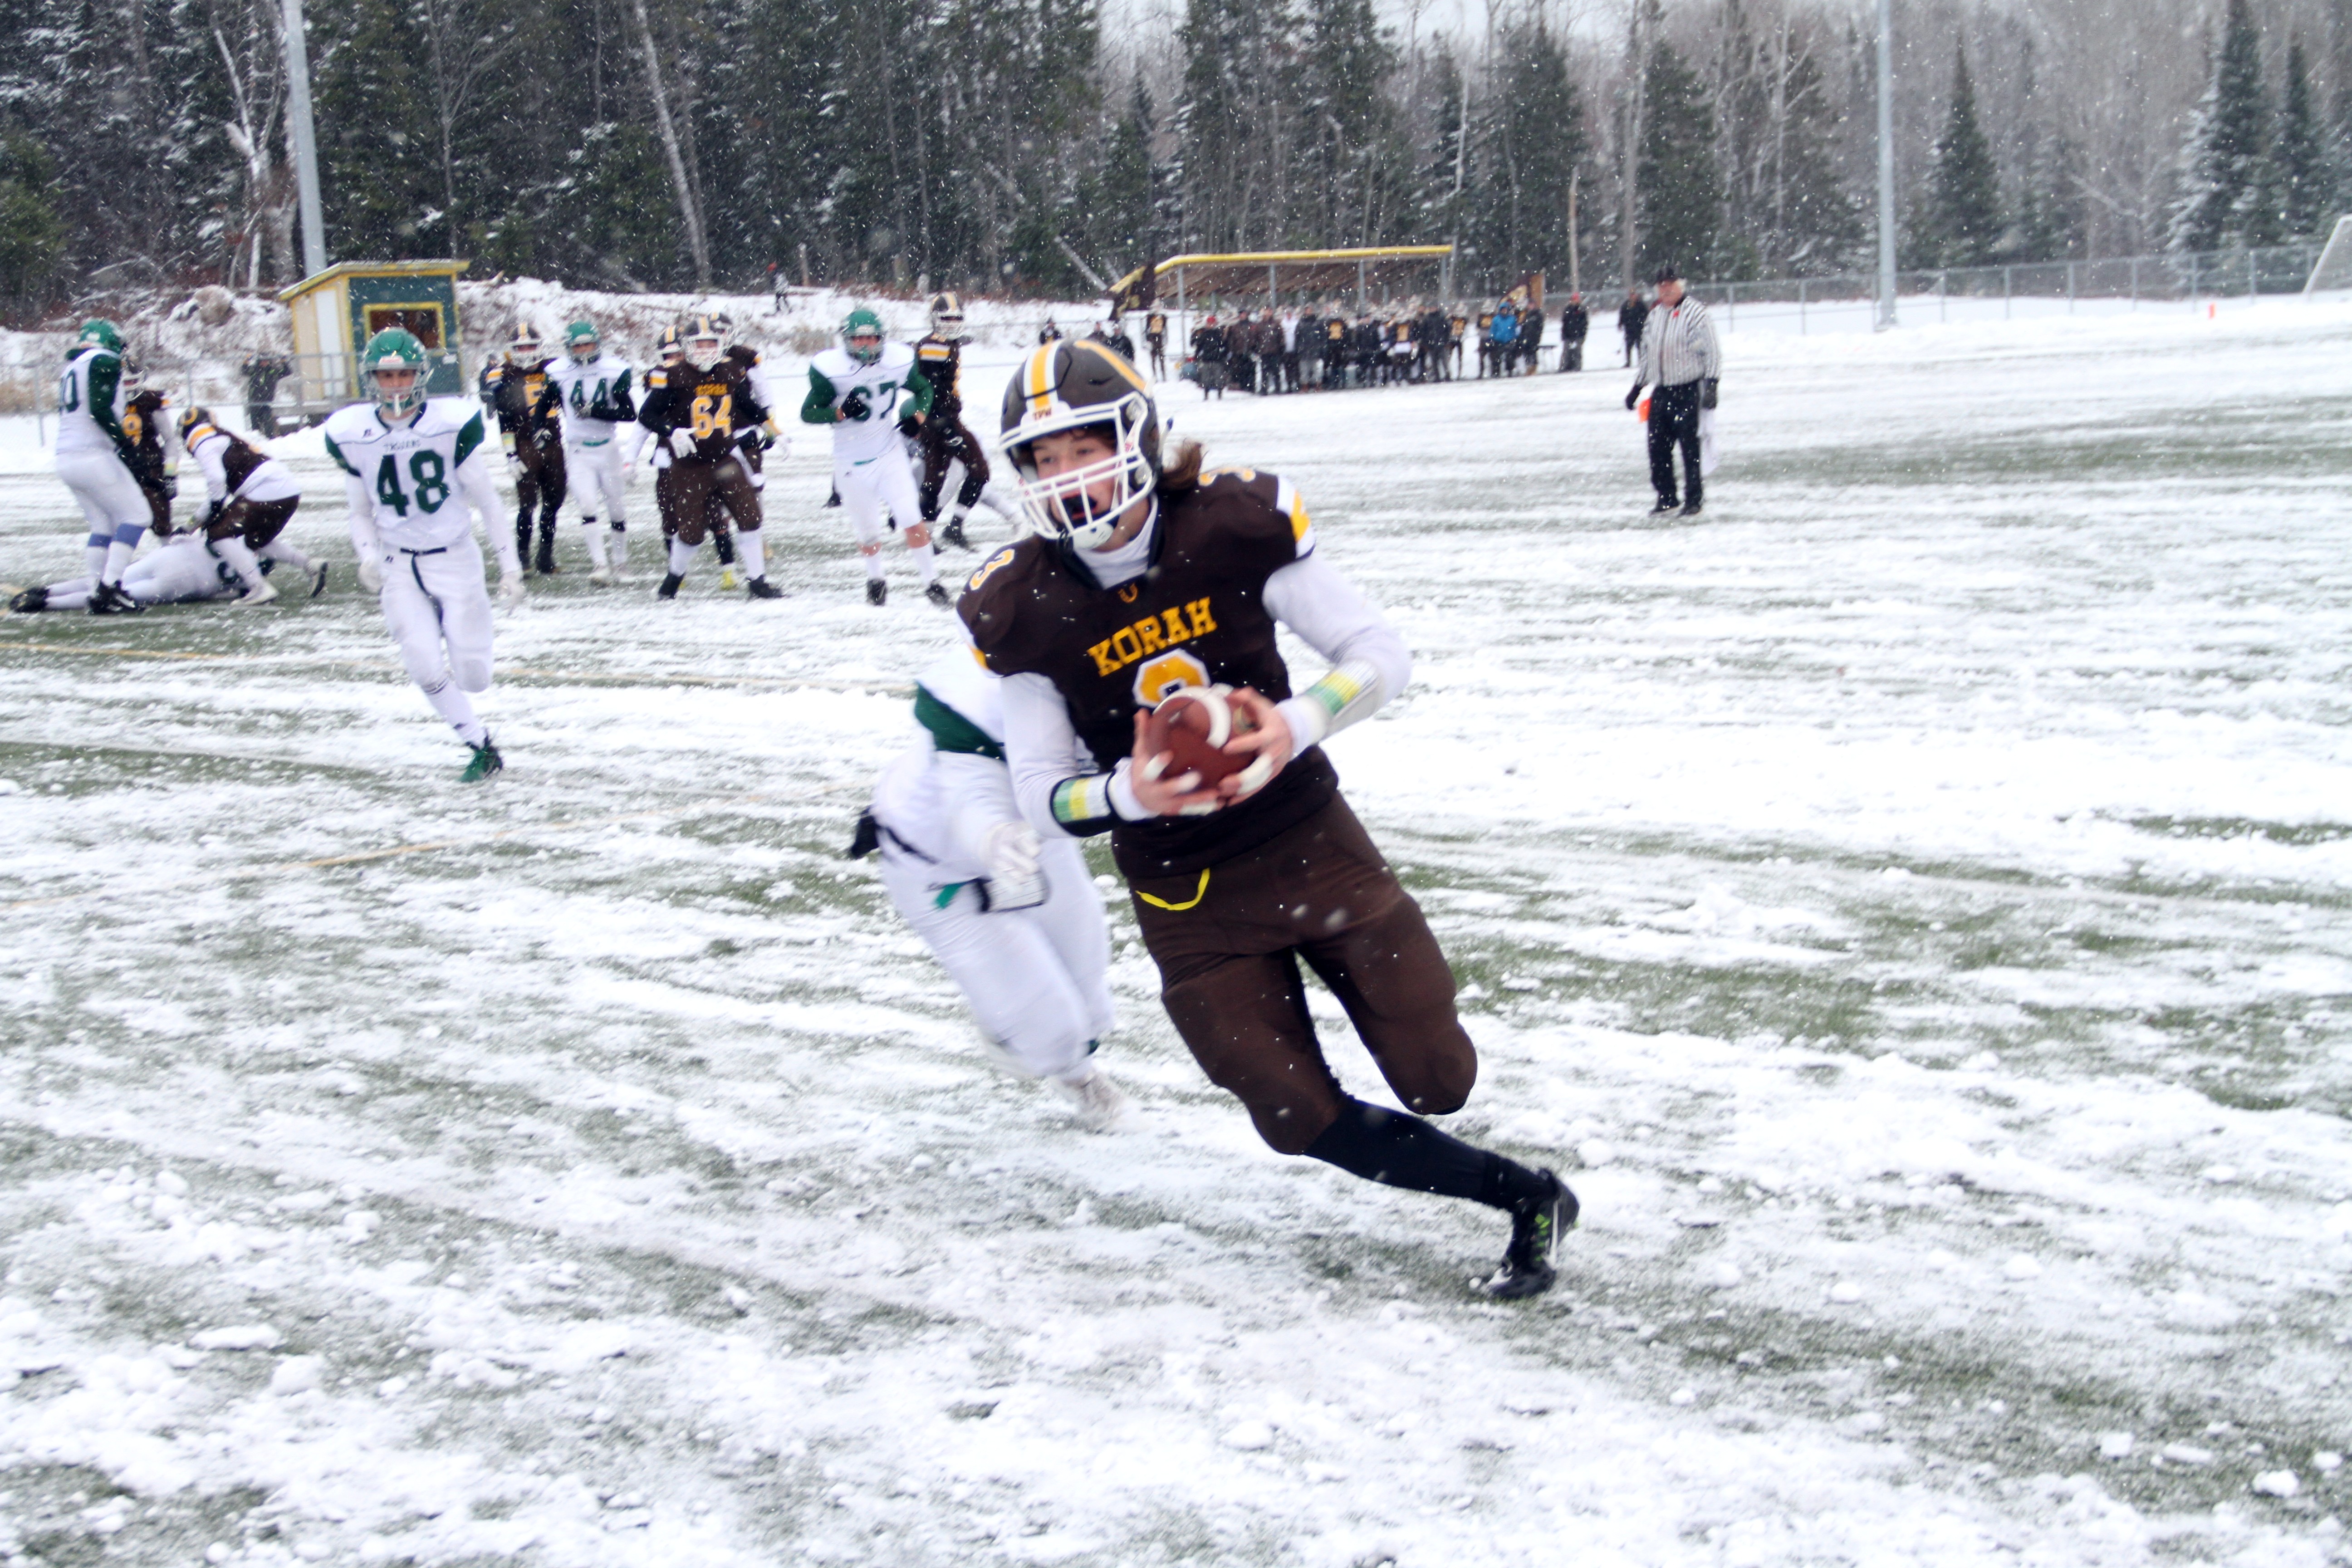 Colts too much for Trojans in NOSSA snow bowl final (PHOTOS)